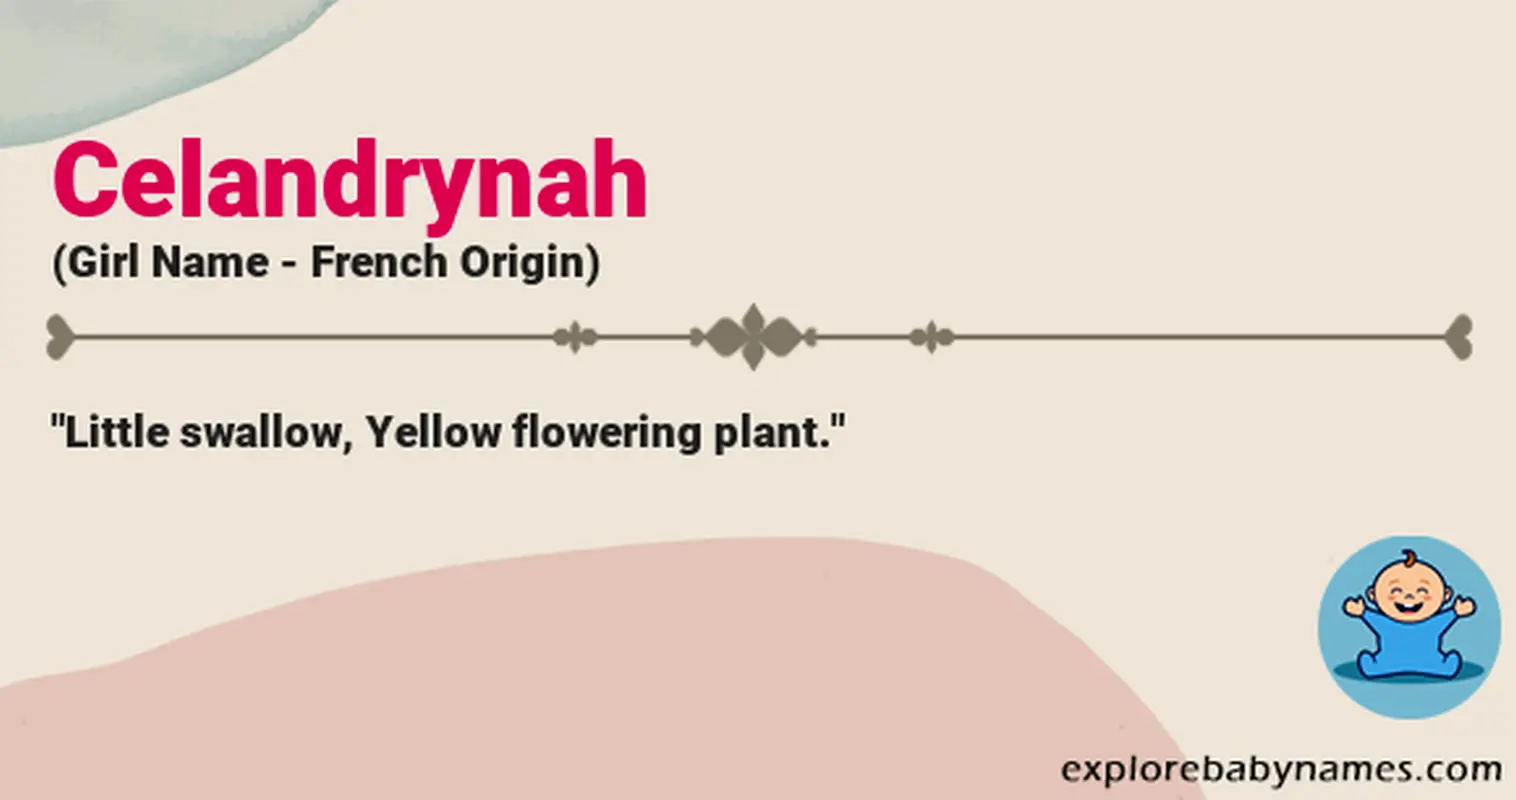 Meaning of Celandrynah